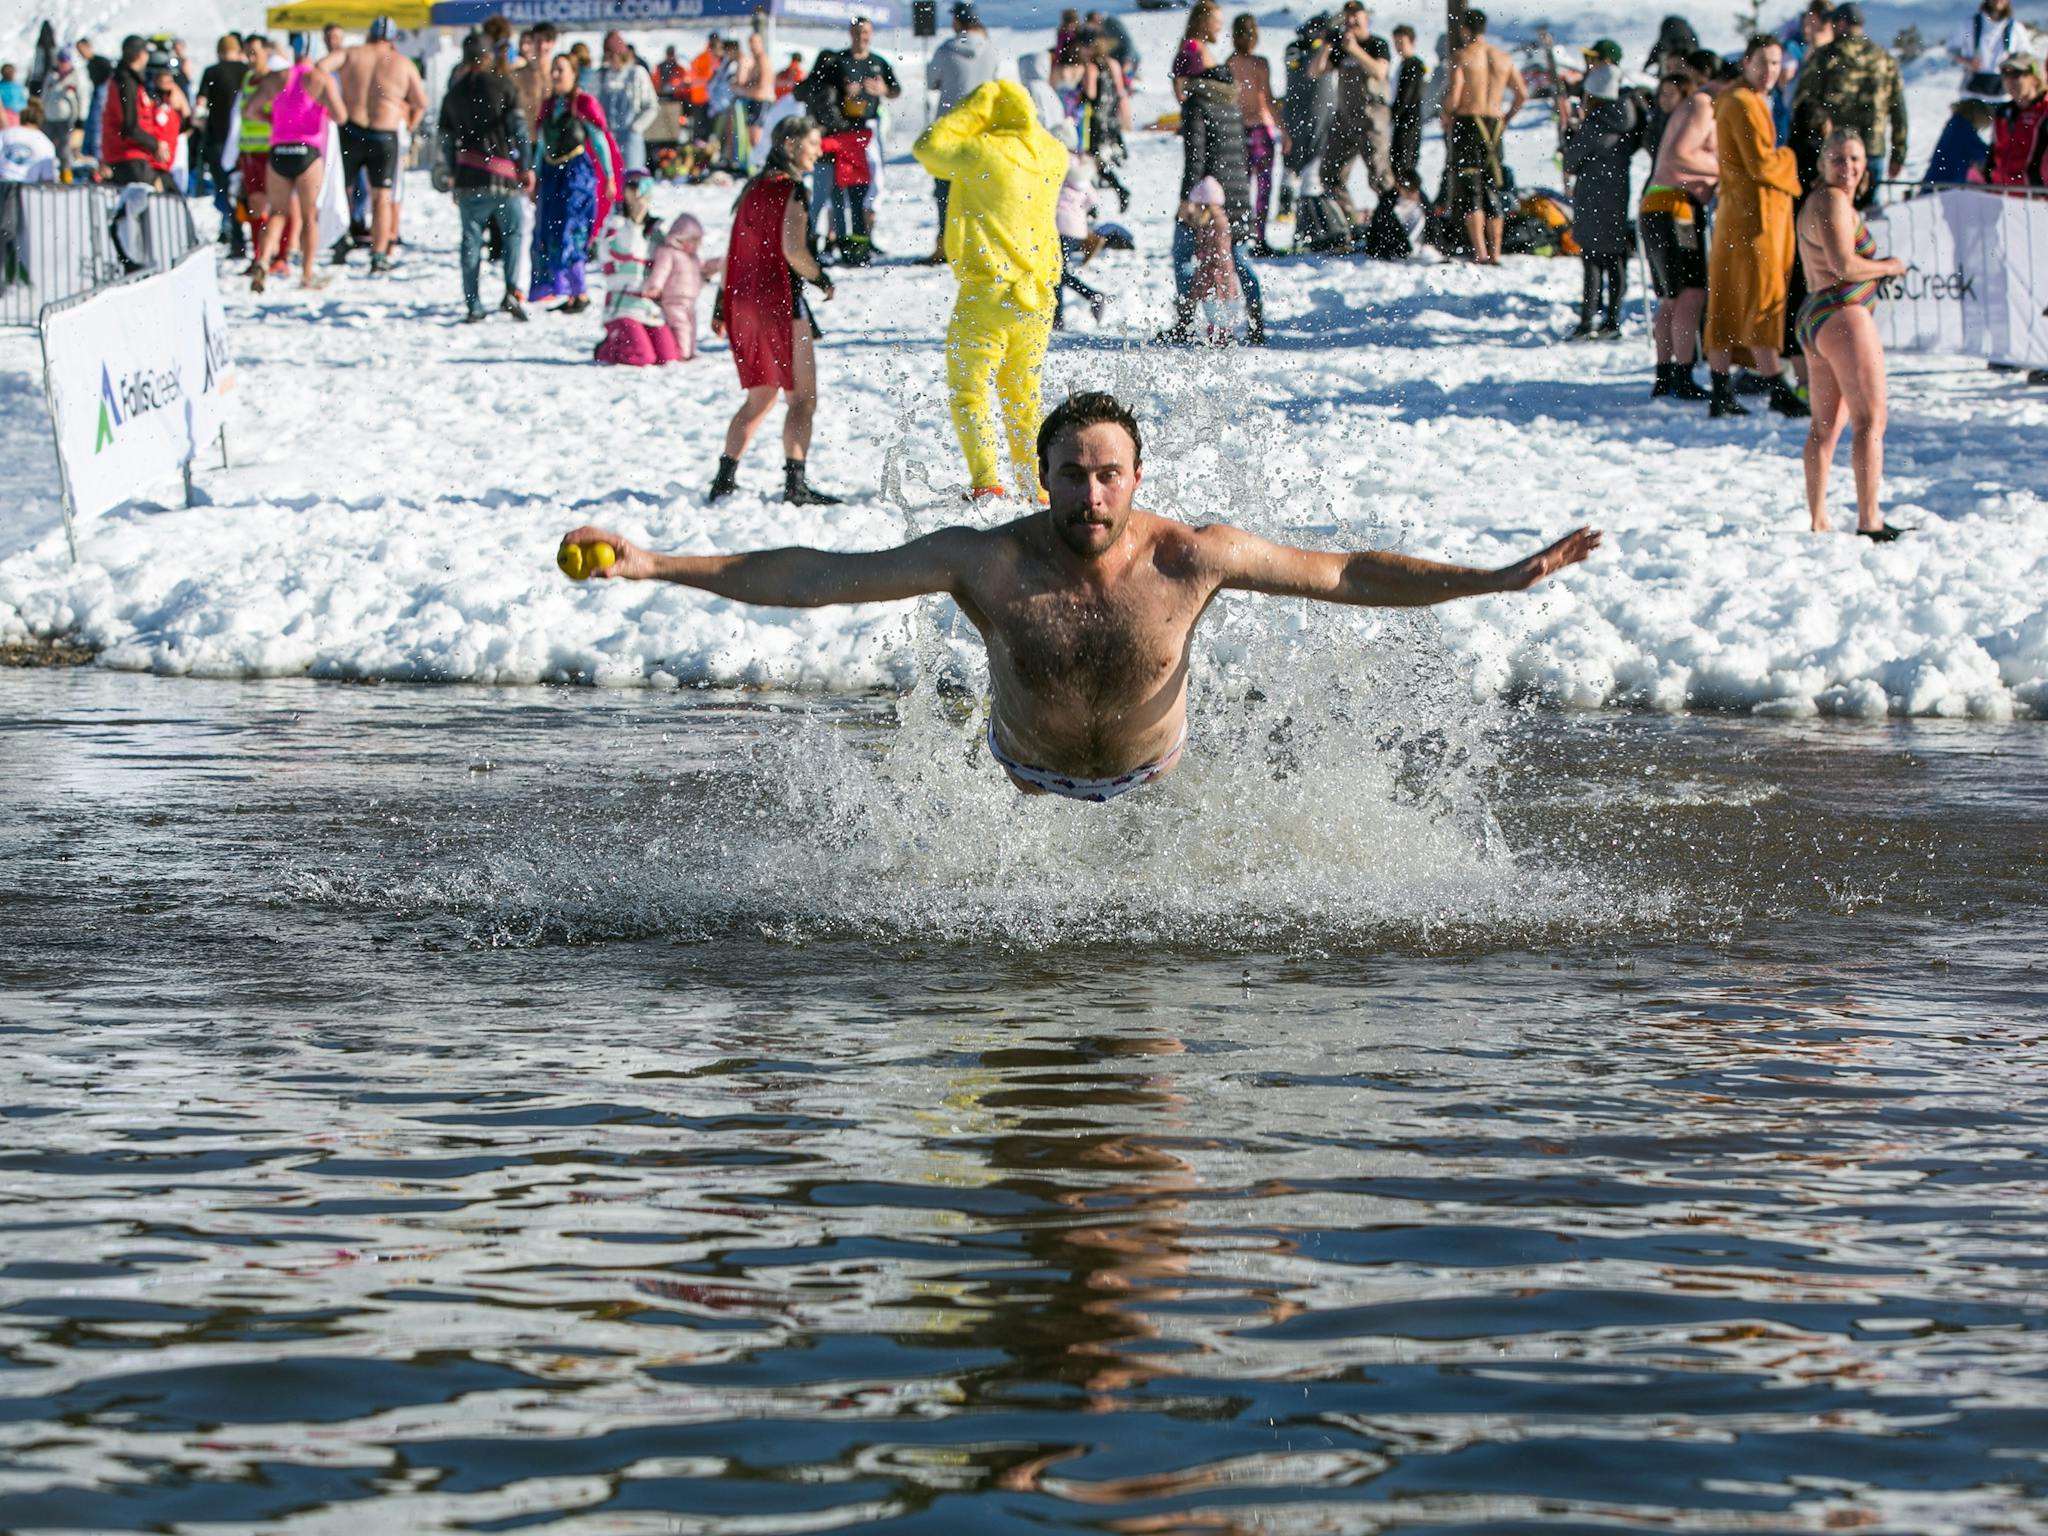 A man in swim trunks diving into a lake with snow on the ground behind